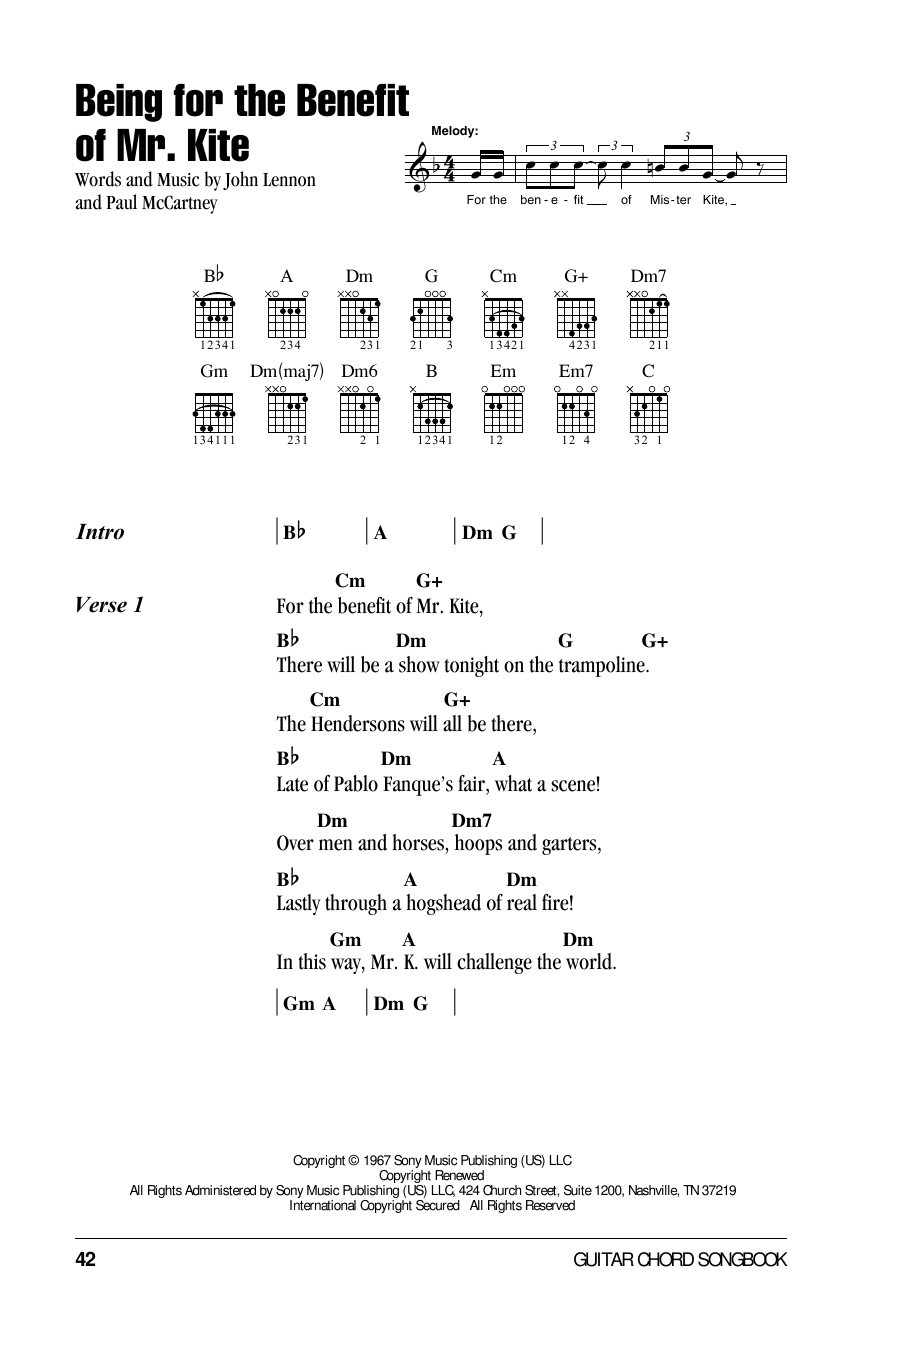 Download The Beatles Being For The Benefit Of Mr. Kite Sheet Music